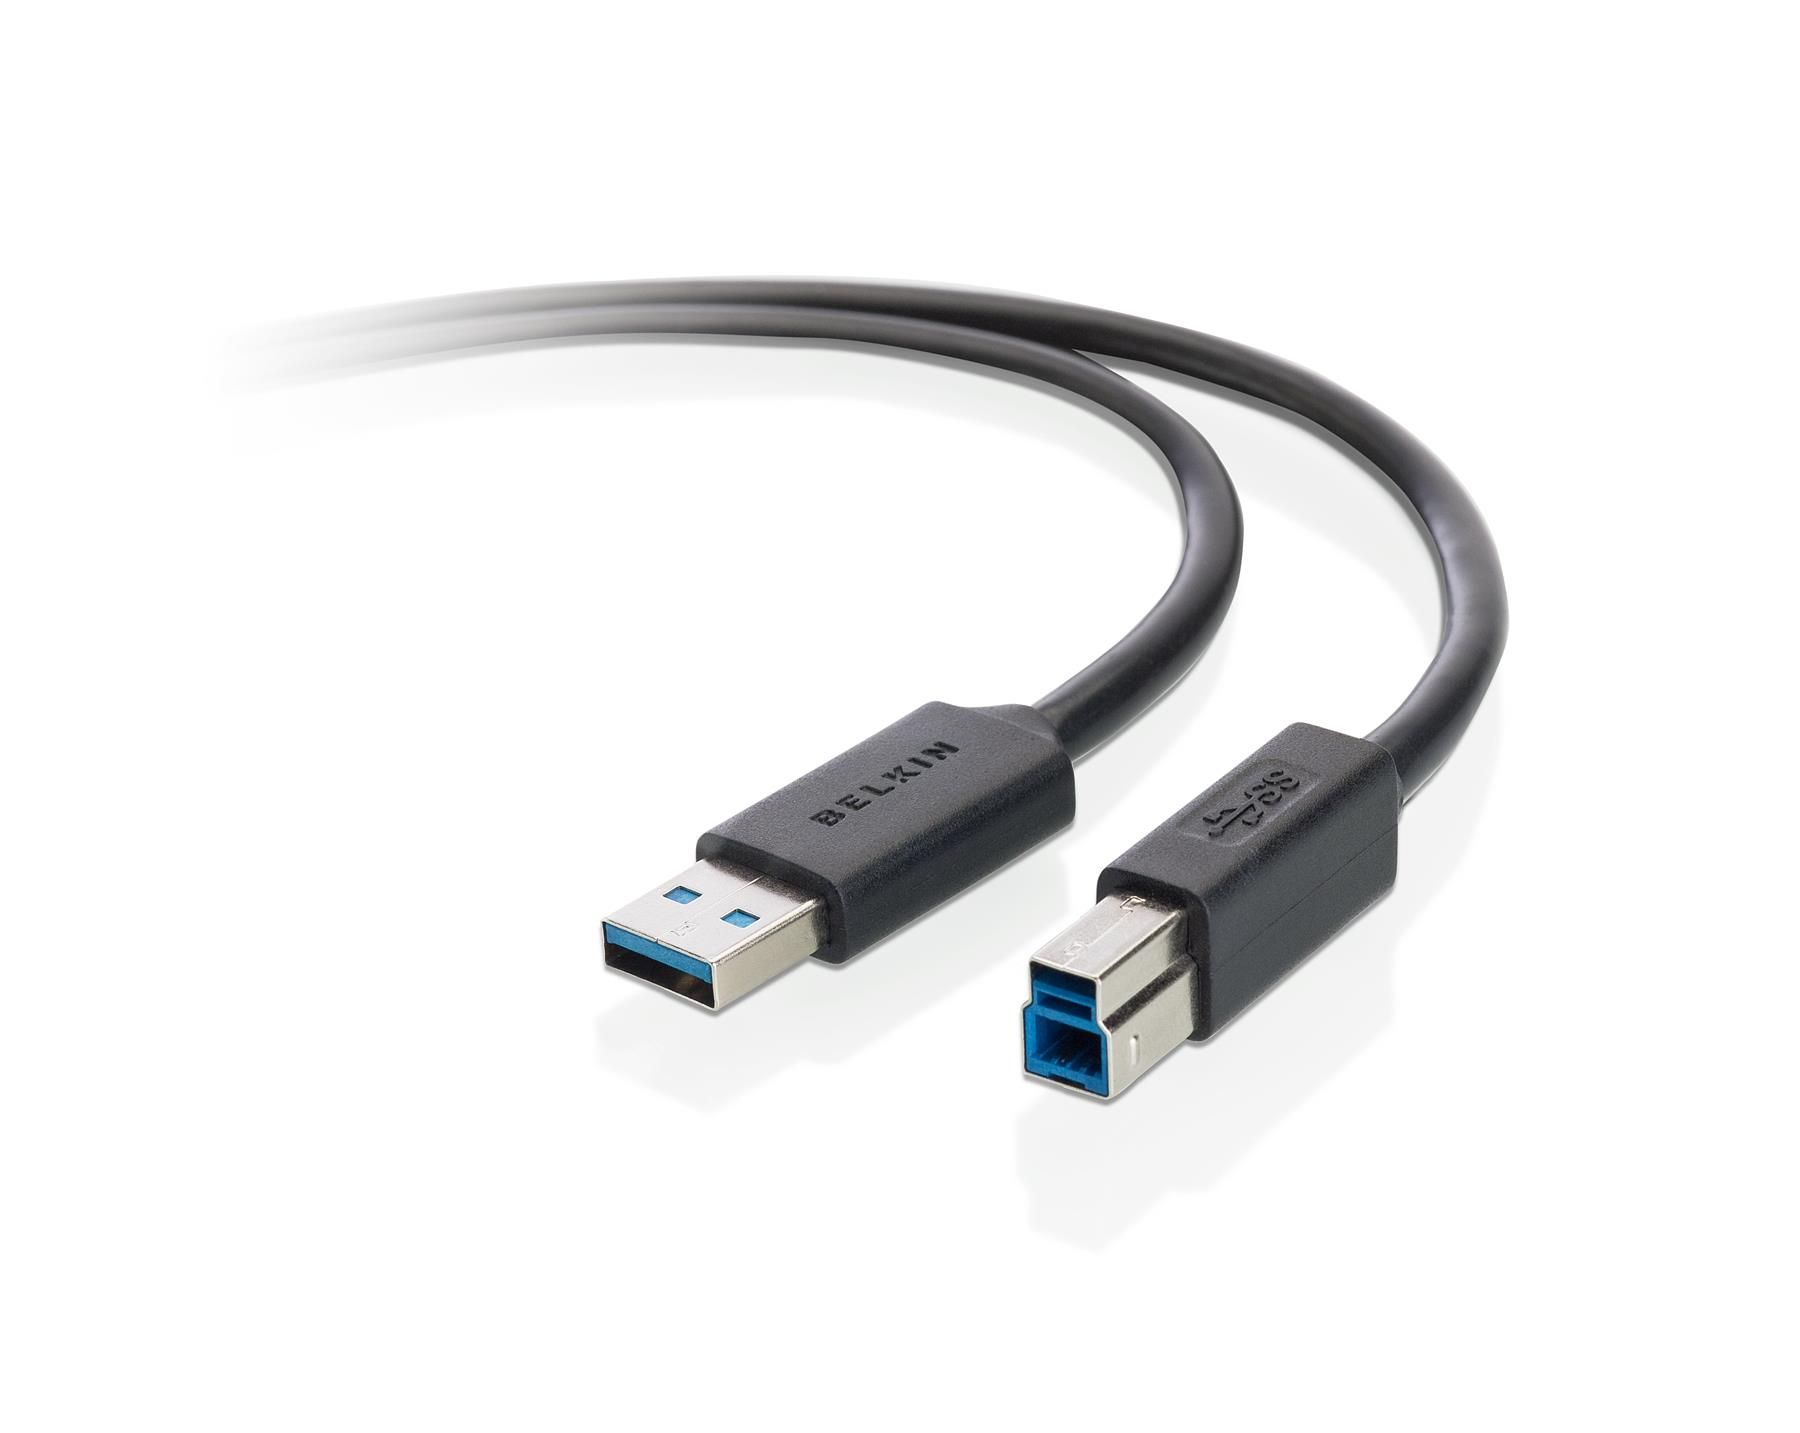 Belkin Usb 3.0 Cable